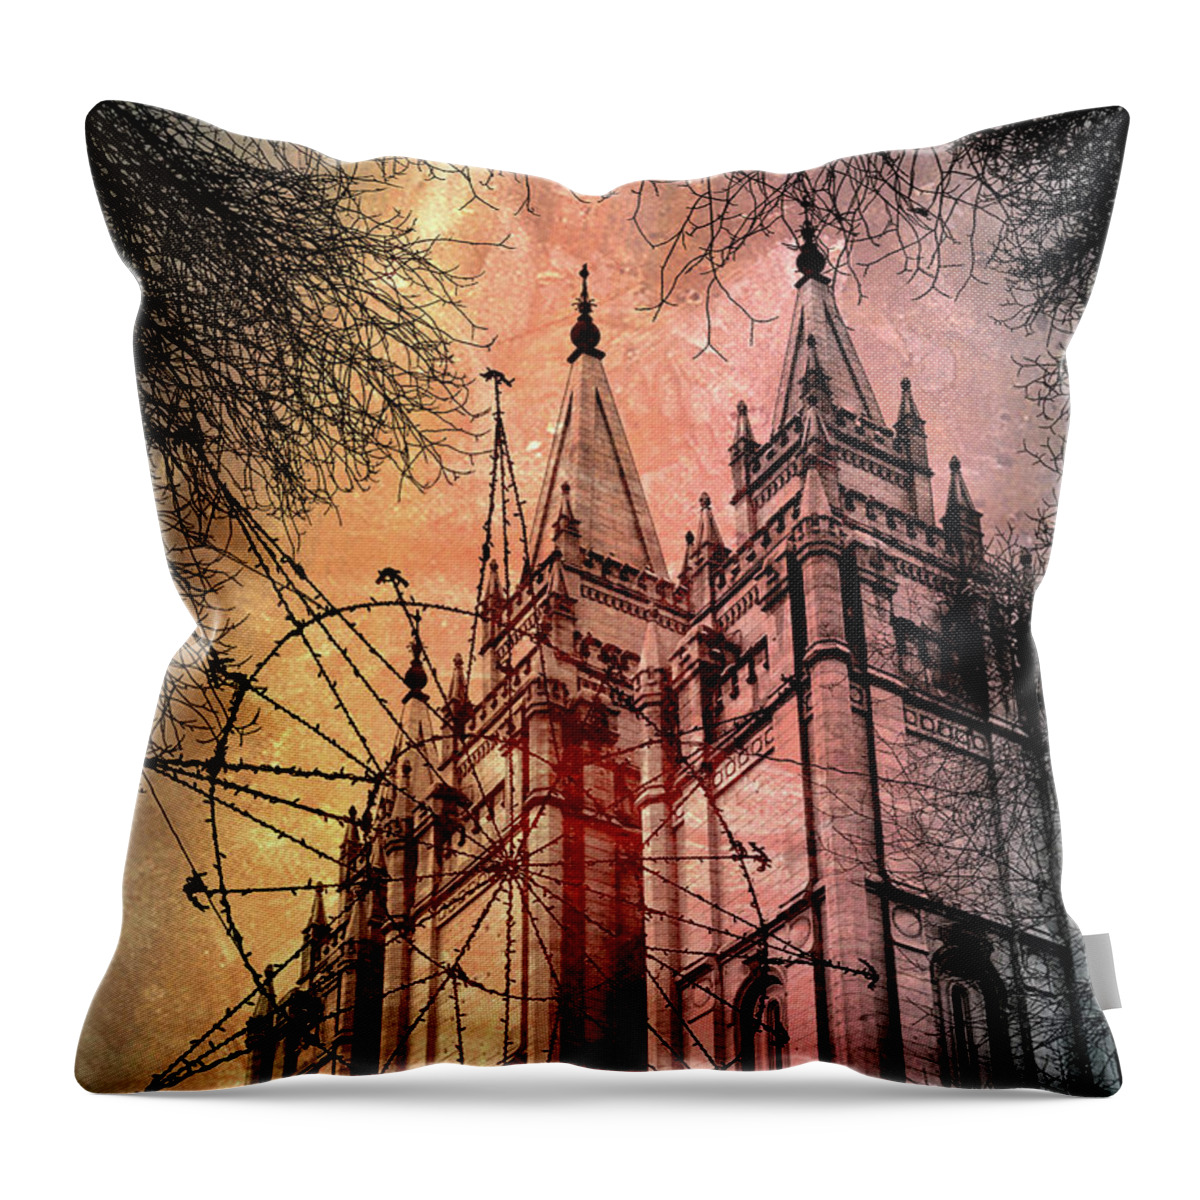 Salt Lake City Throw Pillow featuring the photograph Dark Temple by Jim Hill